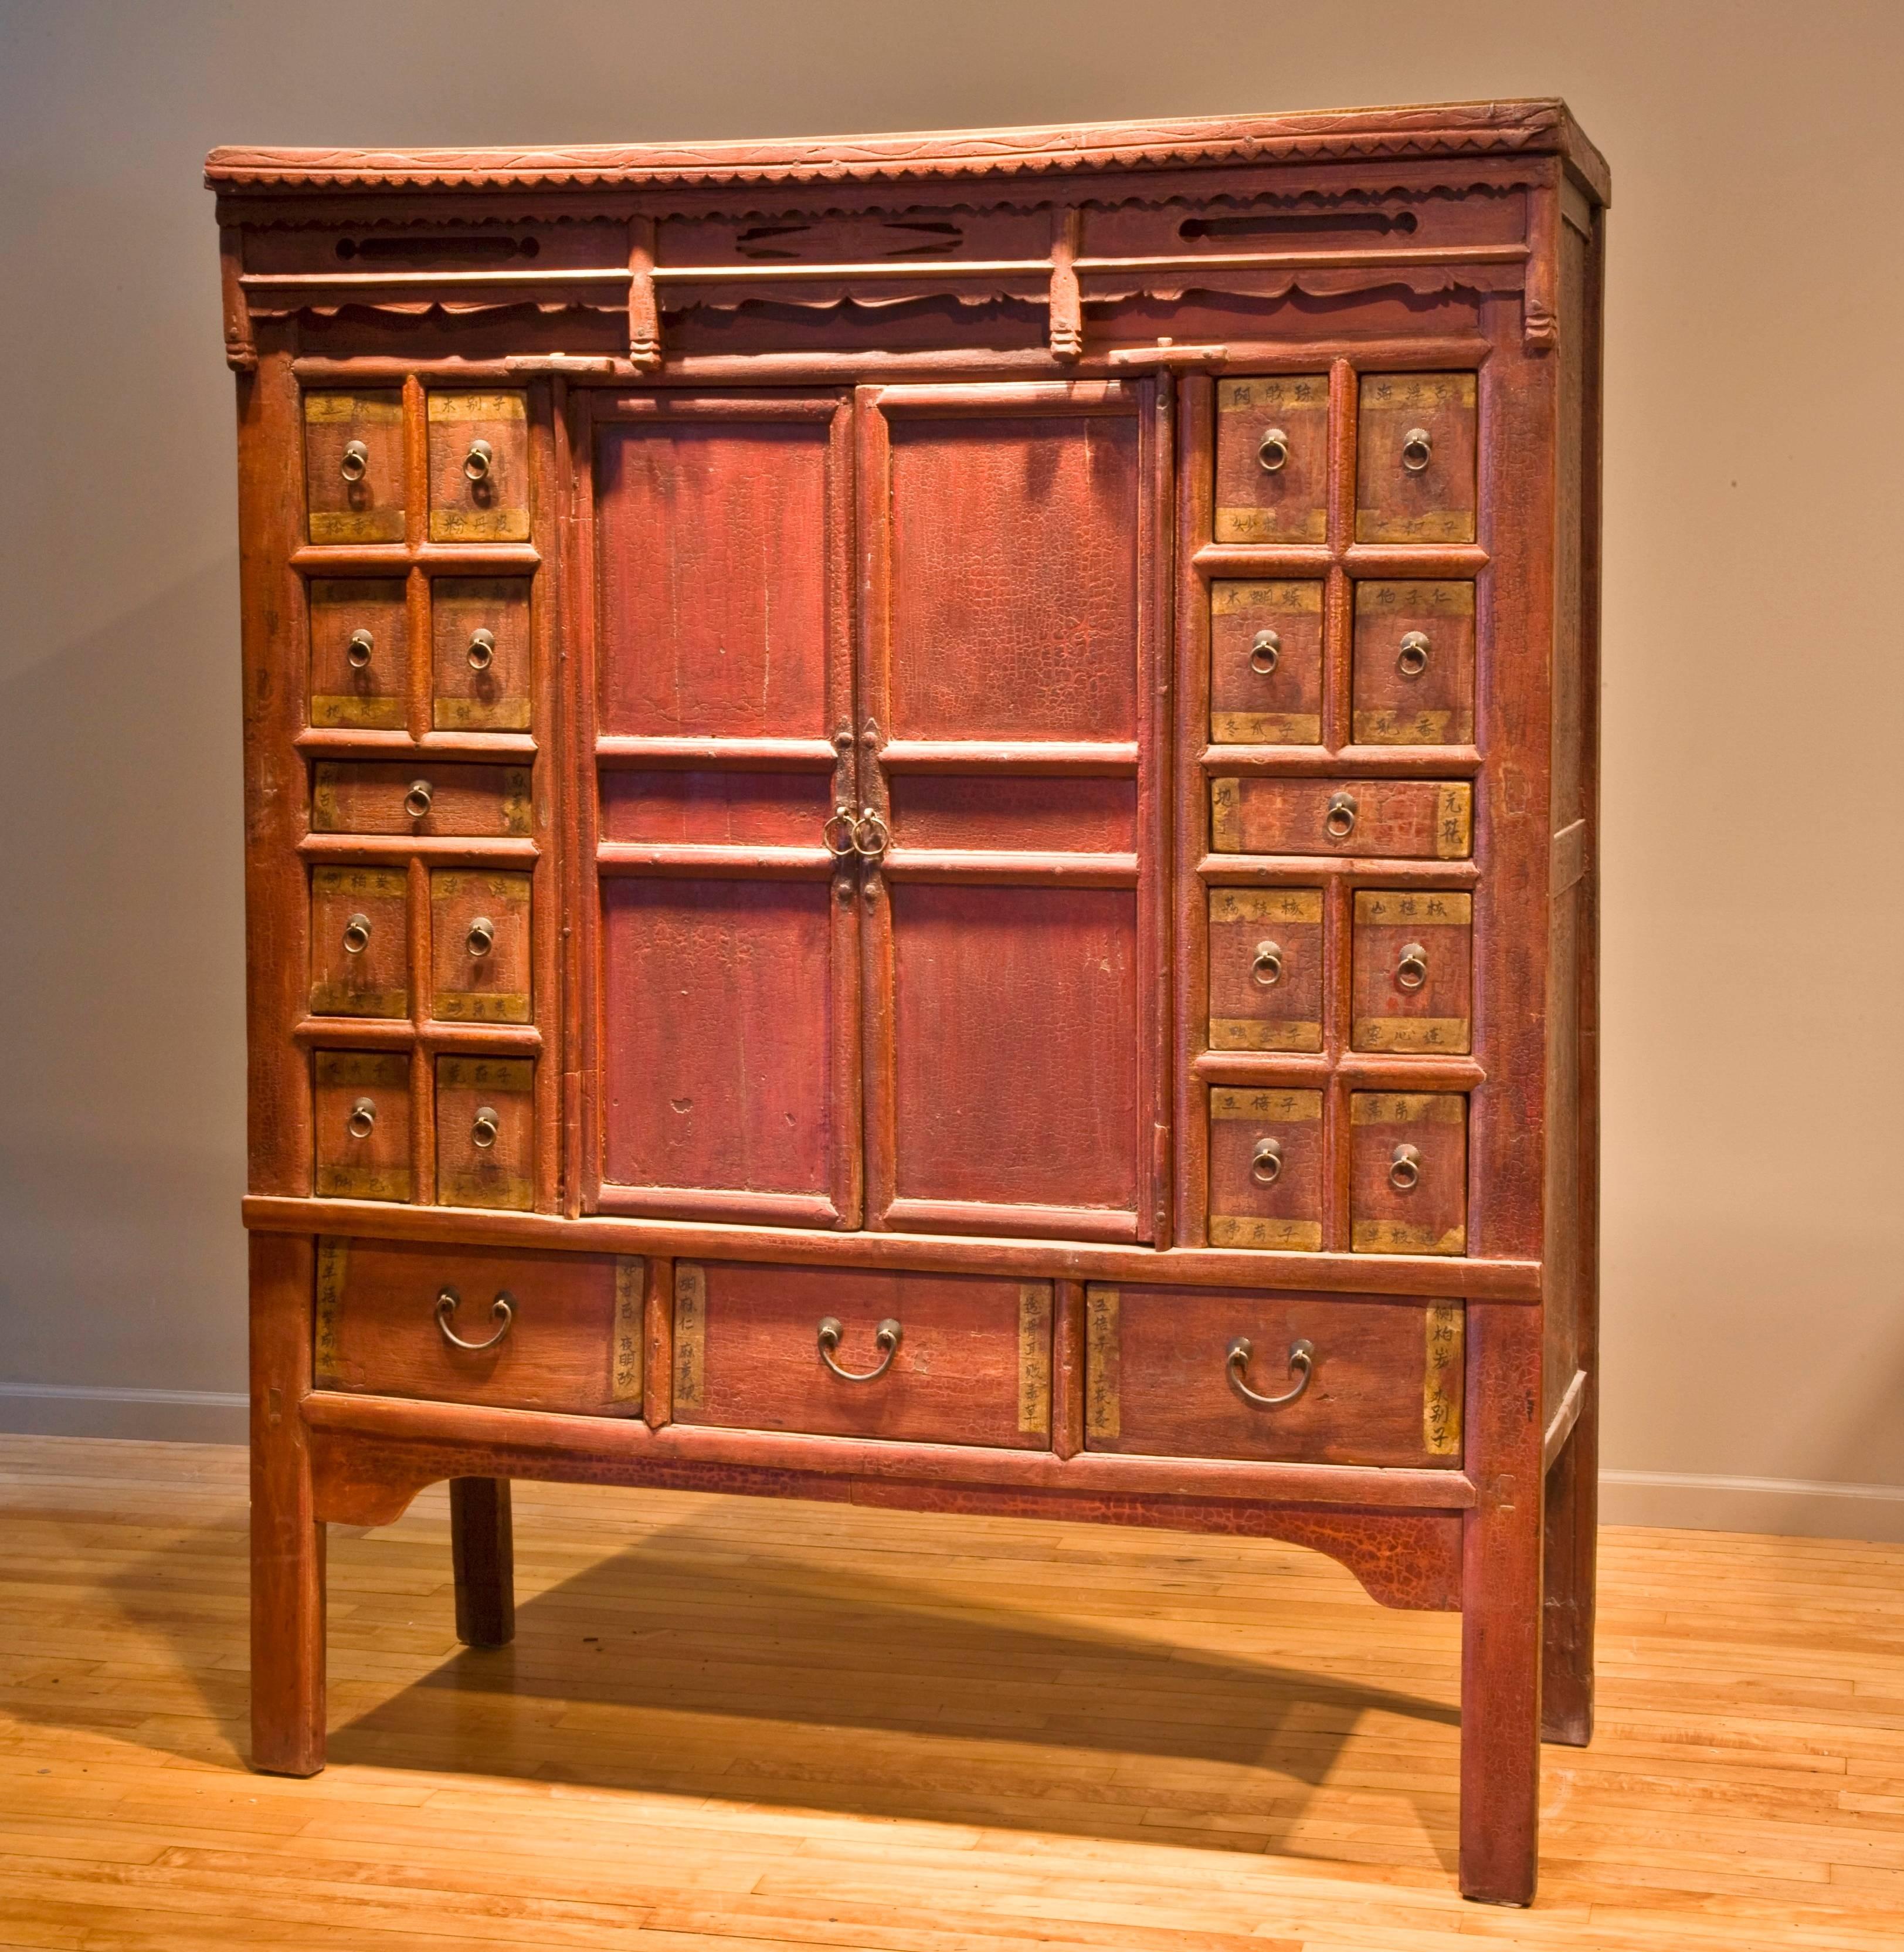 Antique Chinese Apothecary Armoire, Shanxi Province, Early 19th Century 2